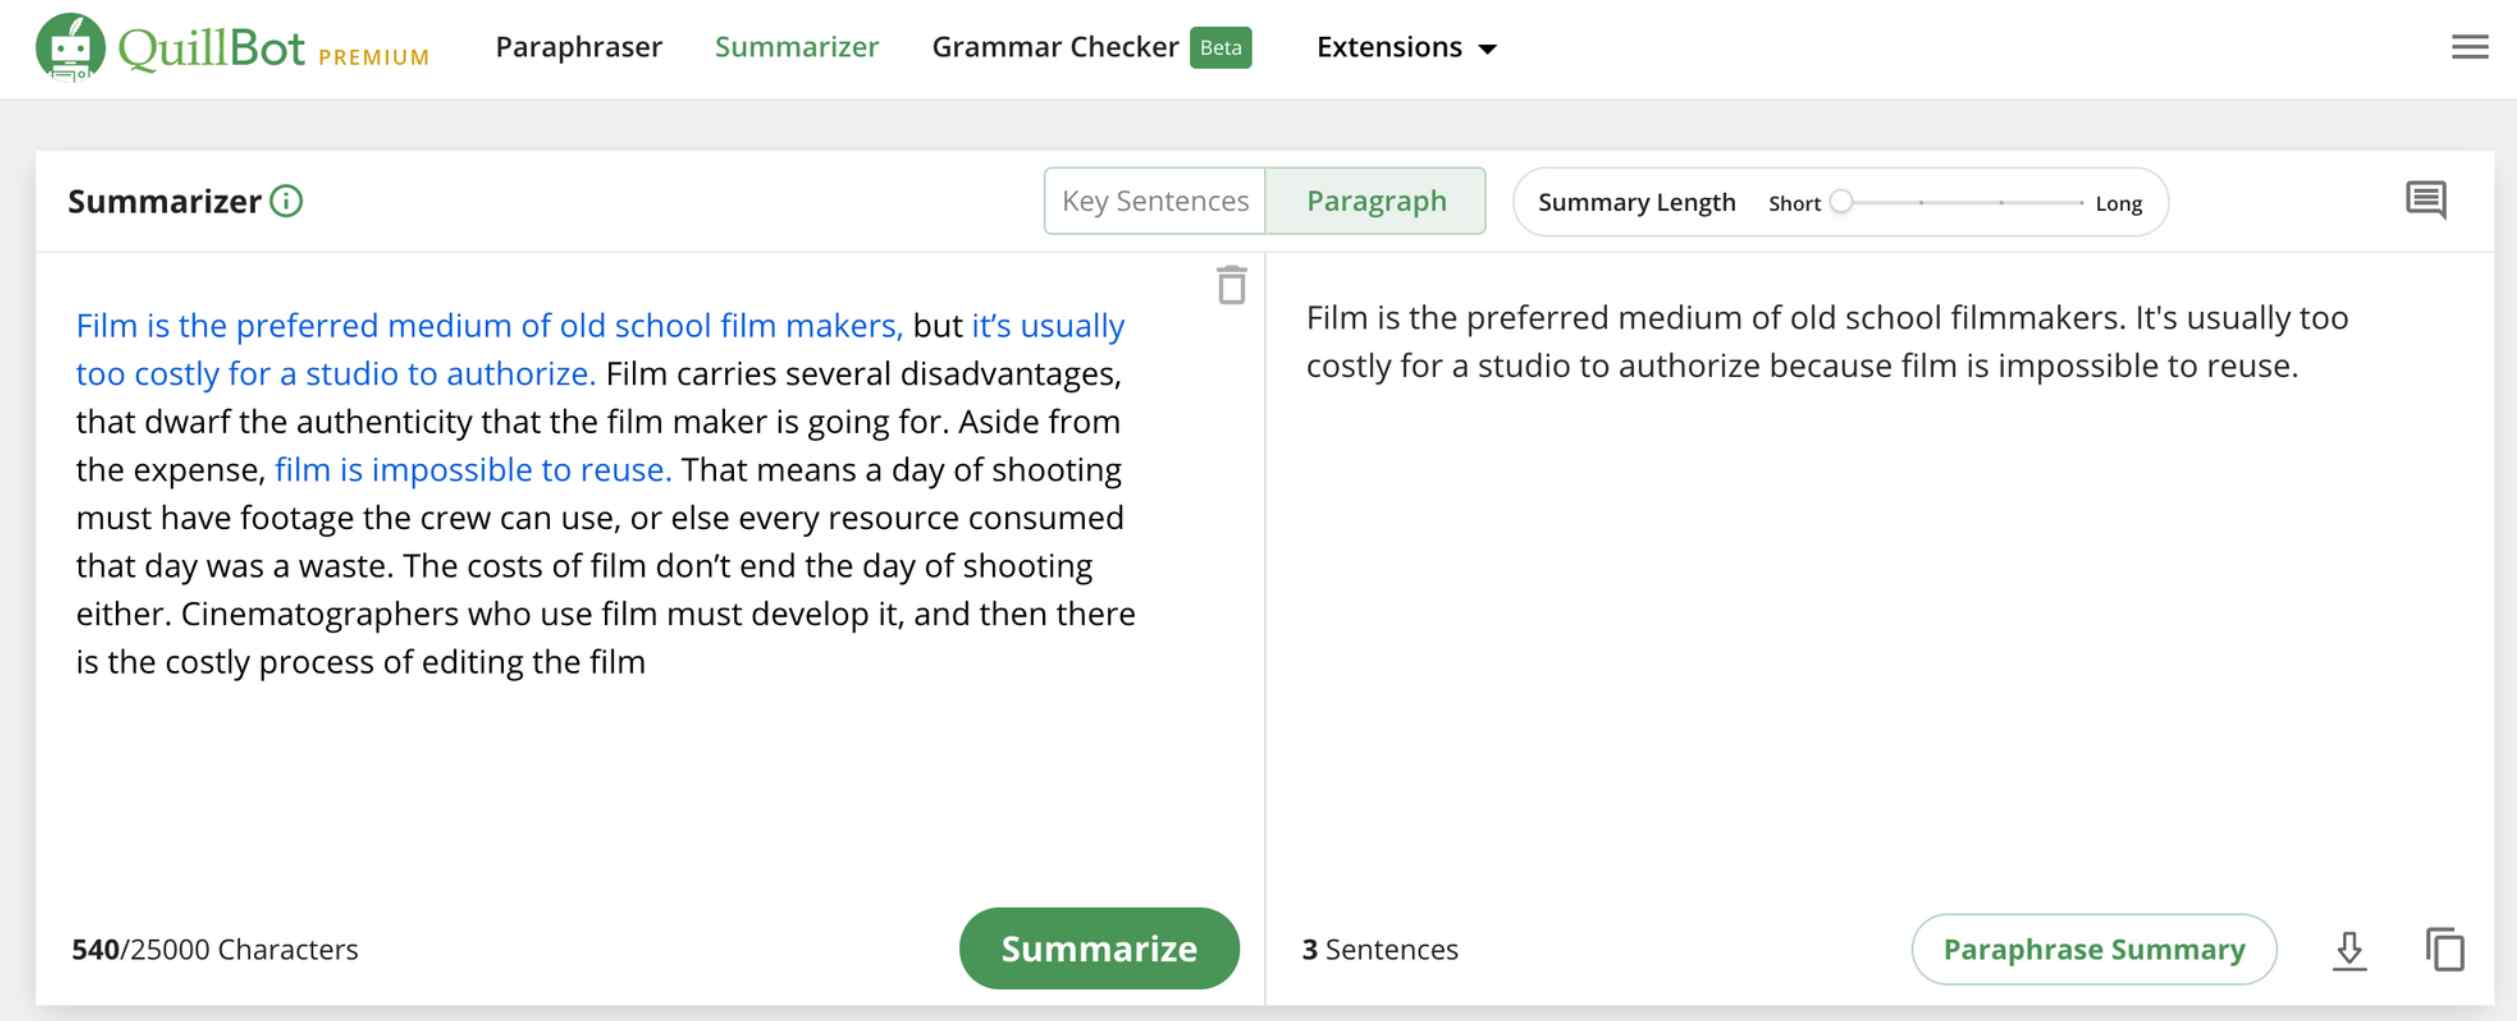 Quilbot Summarizer is an excellent tool for summarizing the key points.